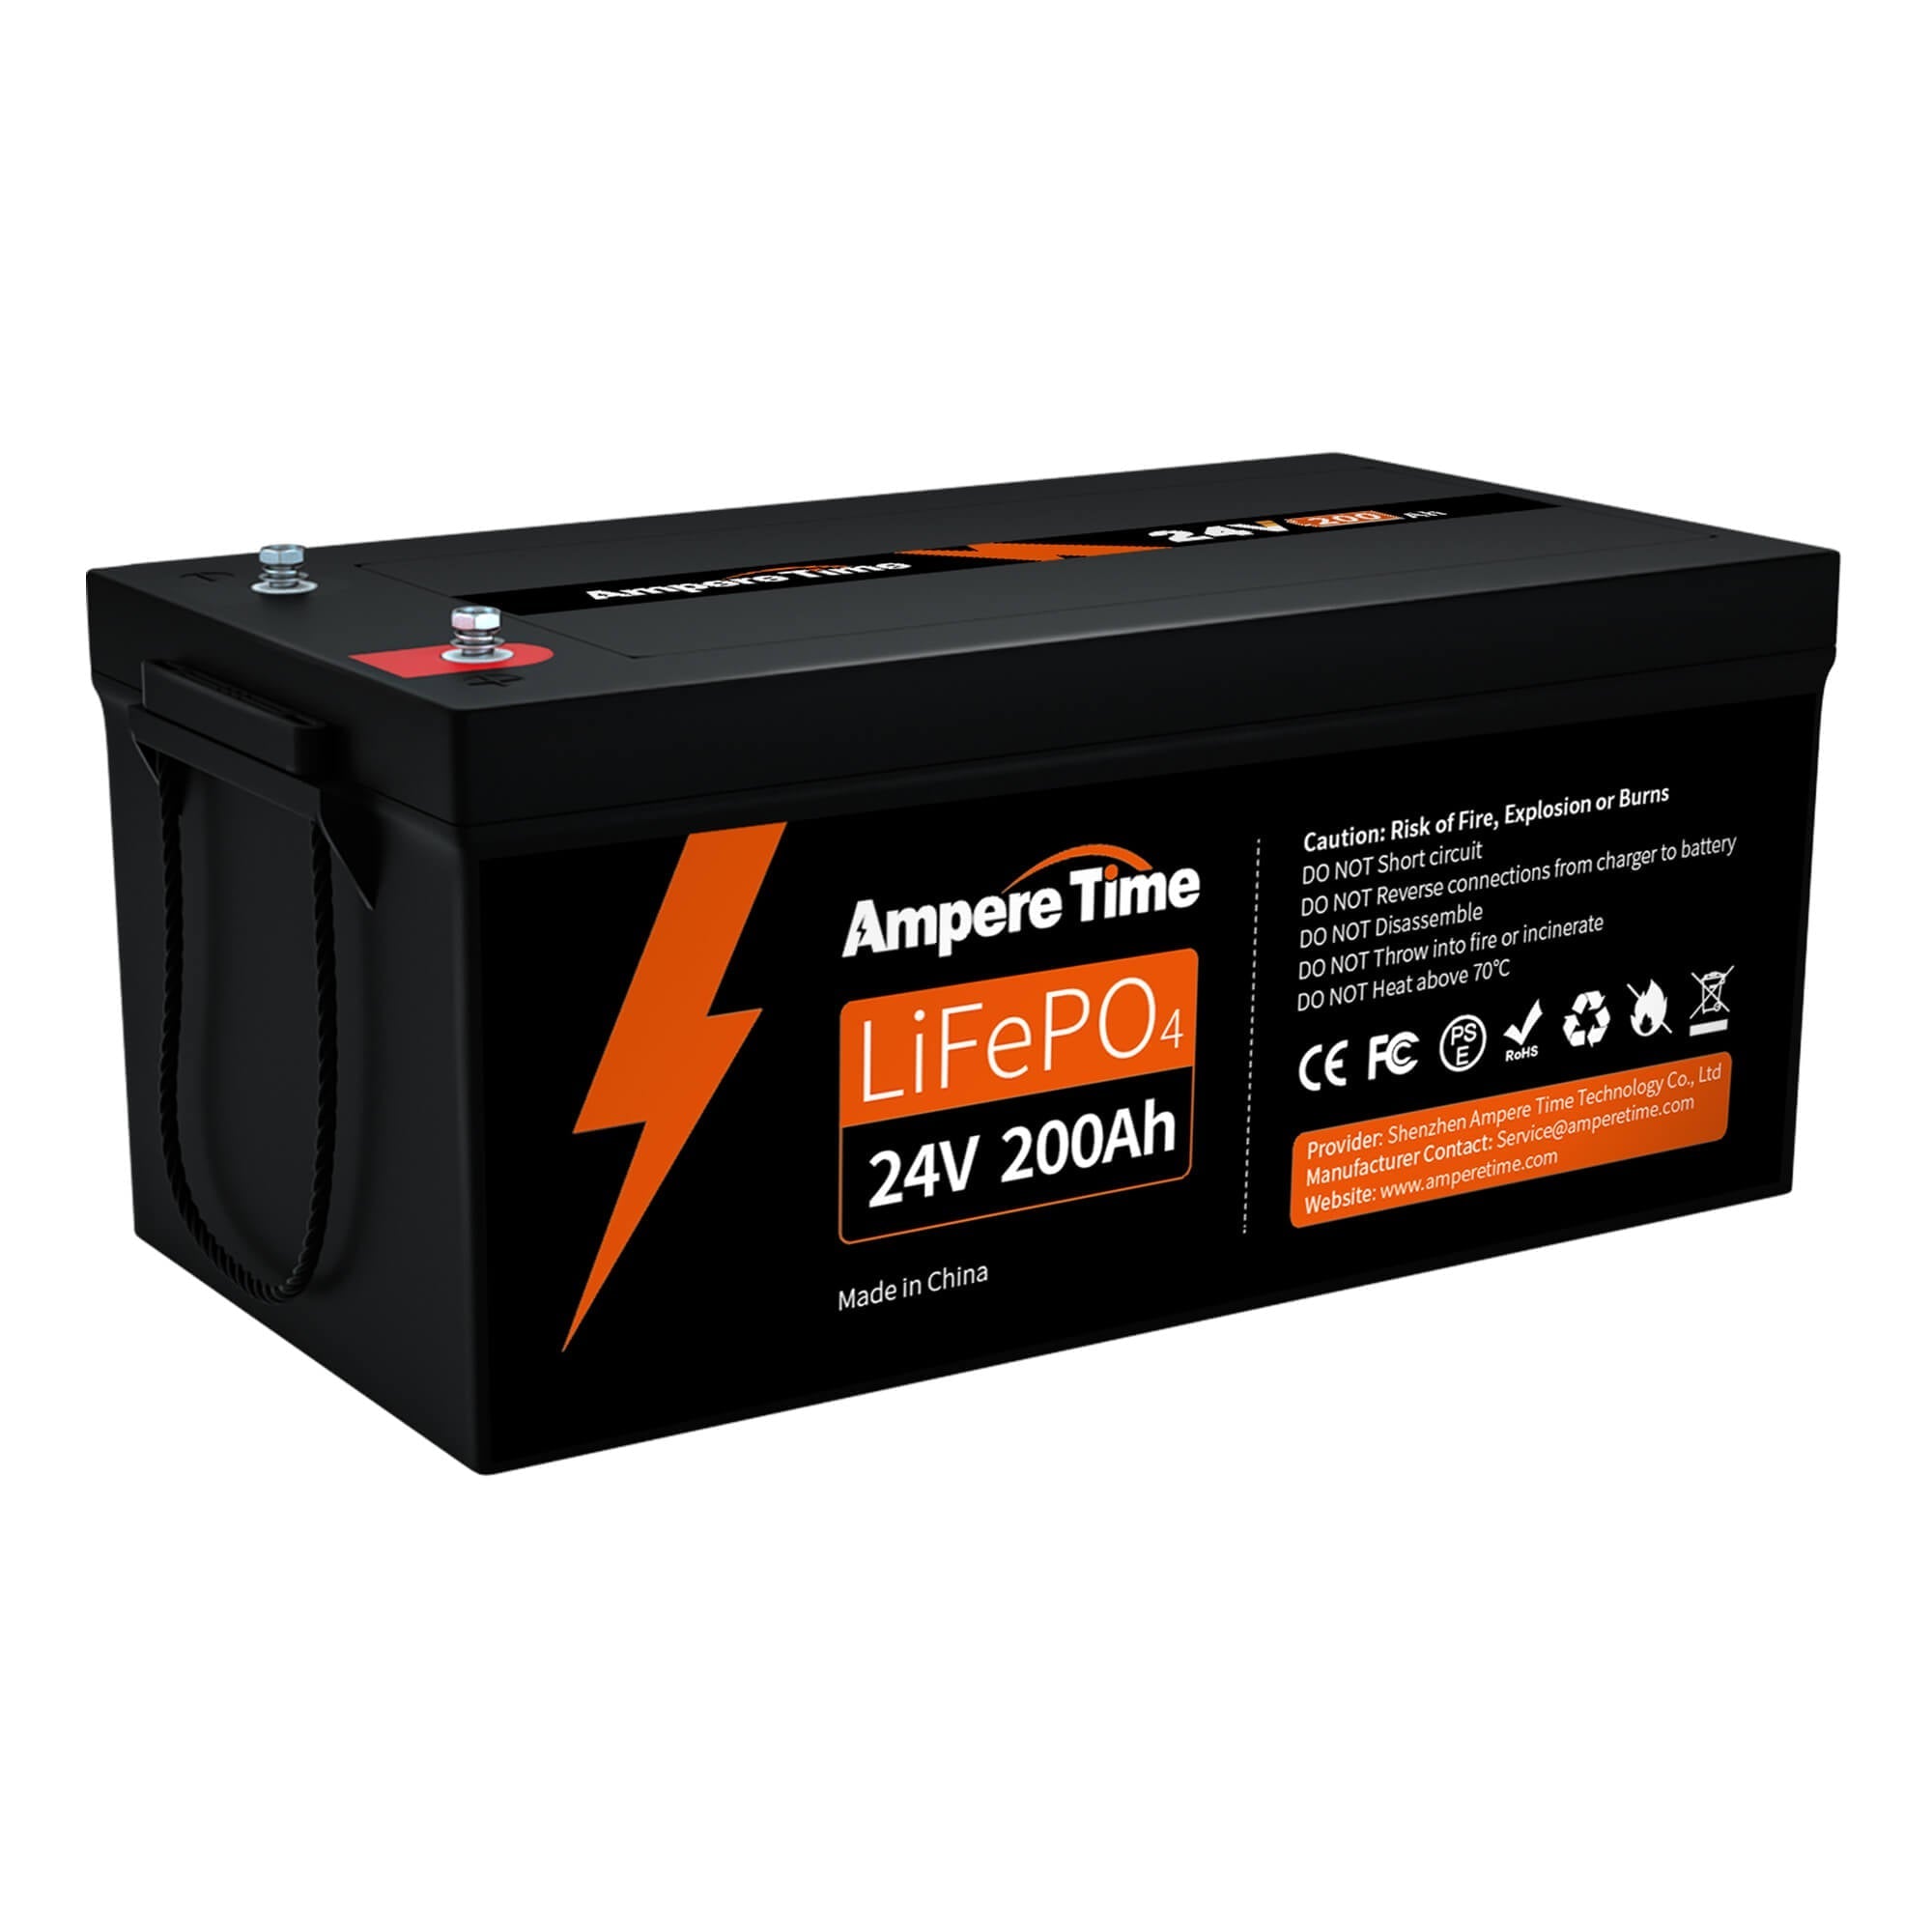 Ampere Time 24V 200Ah Lithium LiFePO4 Battery Ampere Time